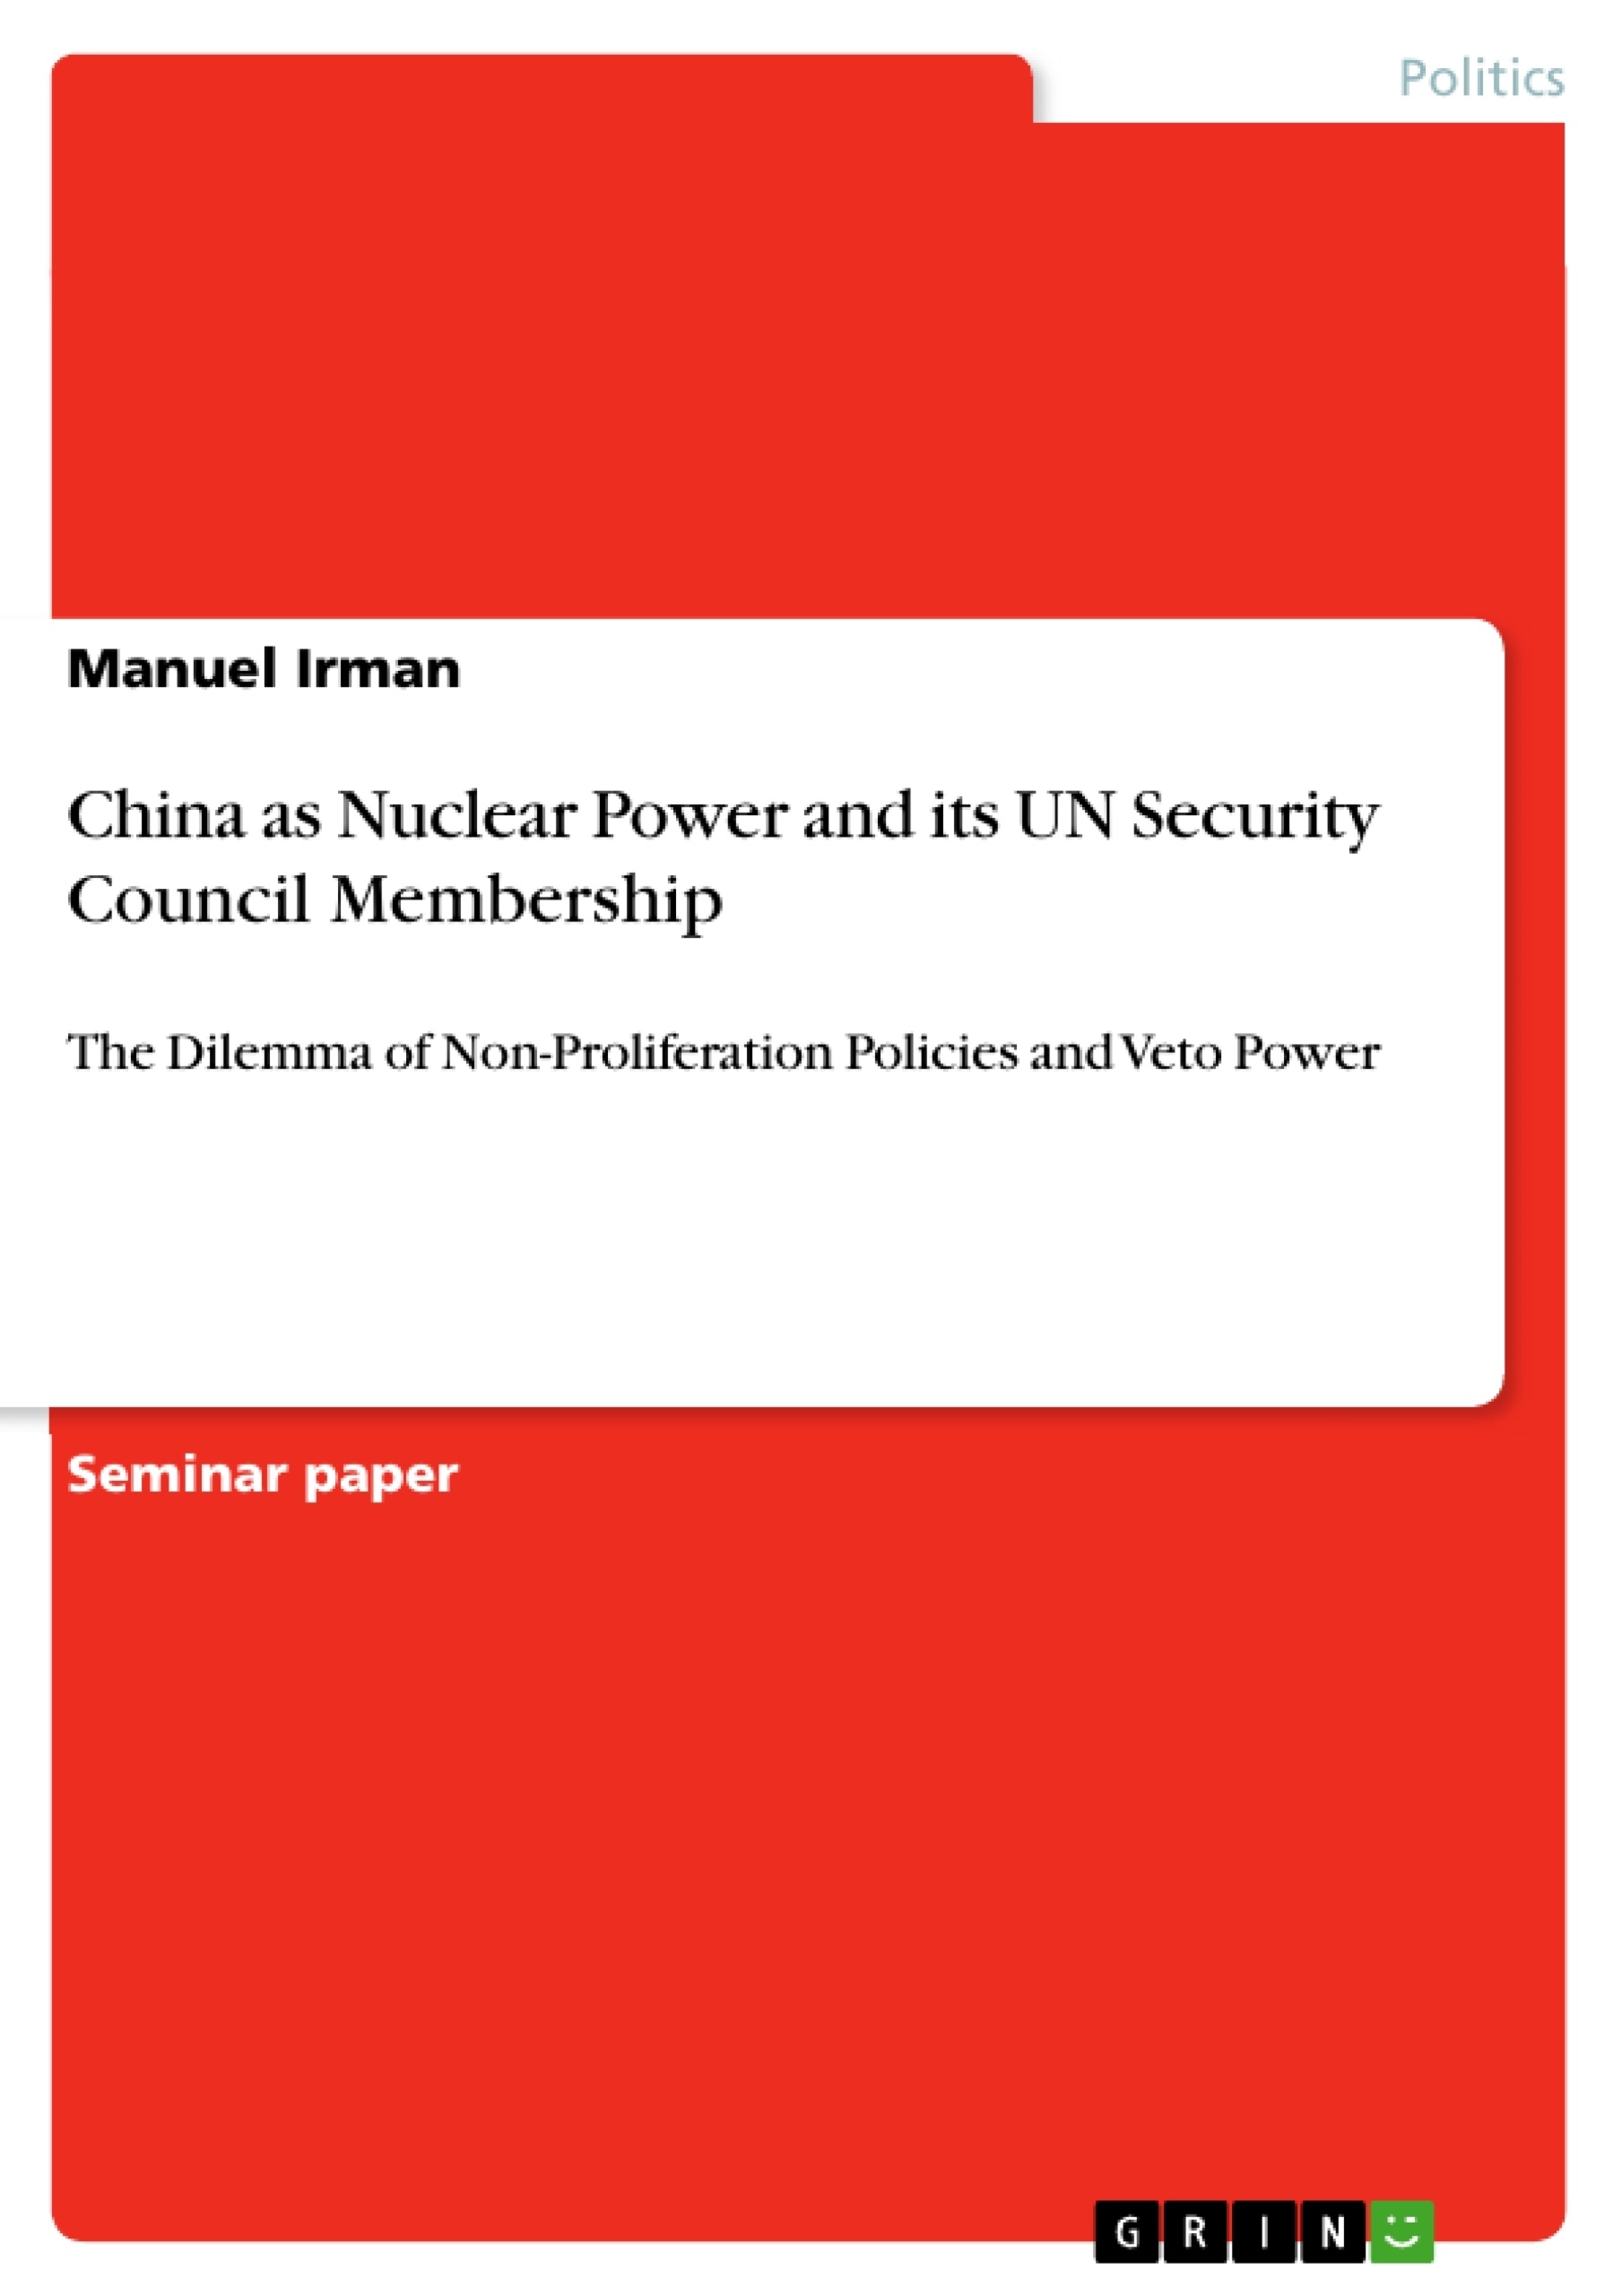 Título: China as Nuclear Power and its UN Security Council Membership